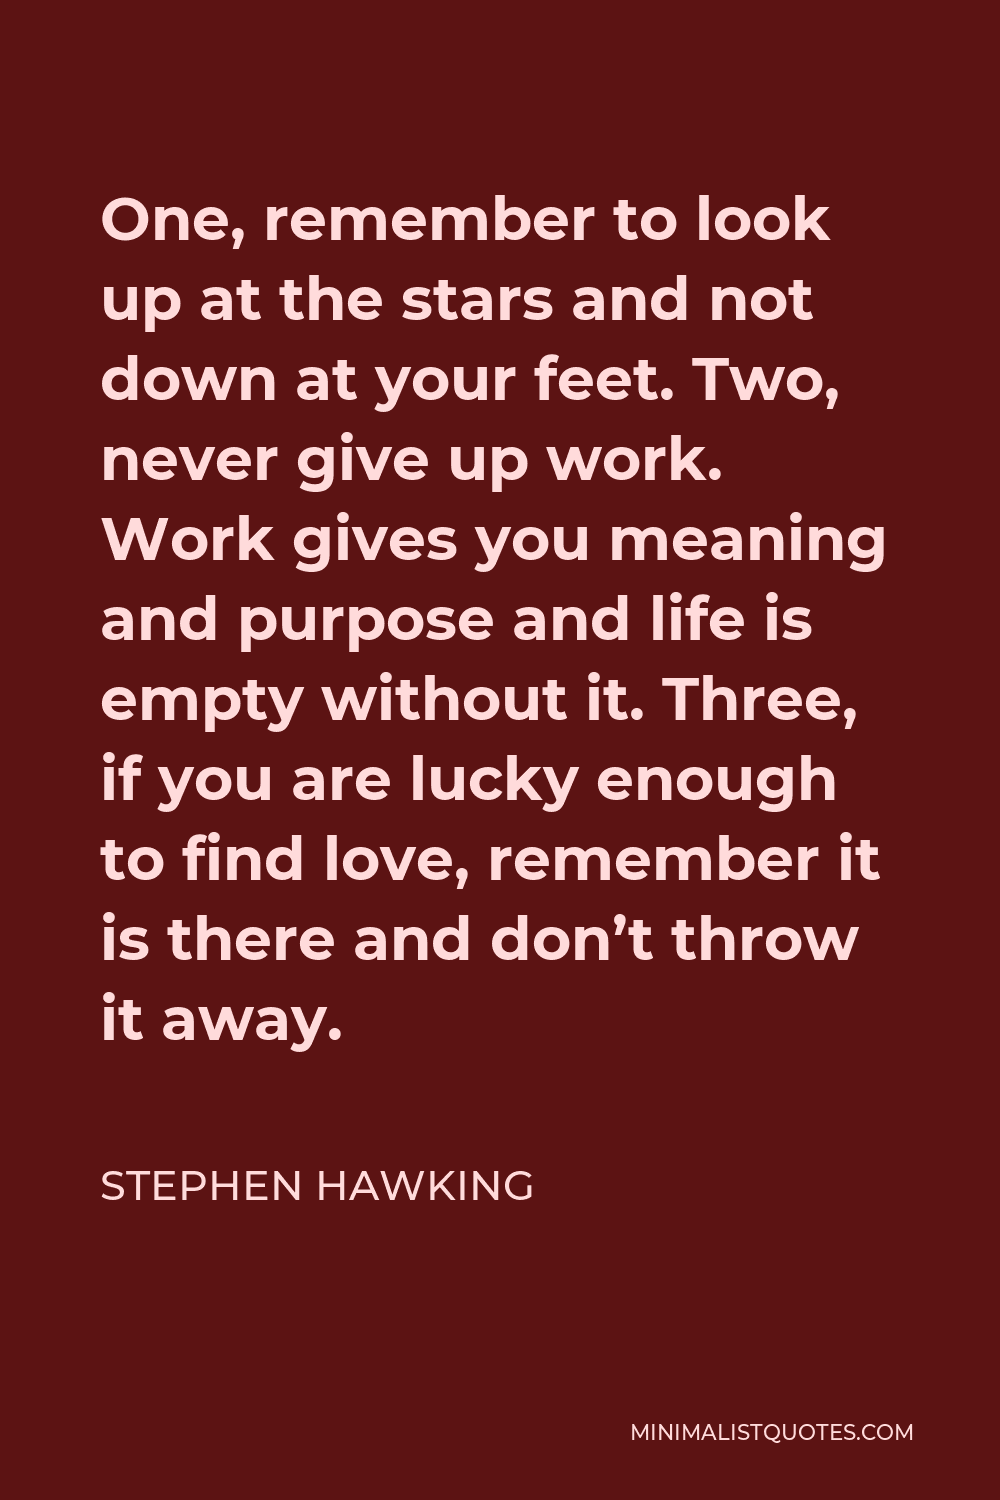 Stephen Hawking Quote - One, remember to look up at the stars and not down at your feet. Two, never give up work. Work gives you meaning and purpose and life is empty without it. Three, if you are lucky enough to find love, remember it is there and don’t throw it away.